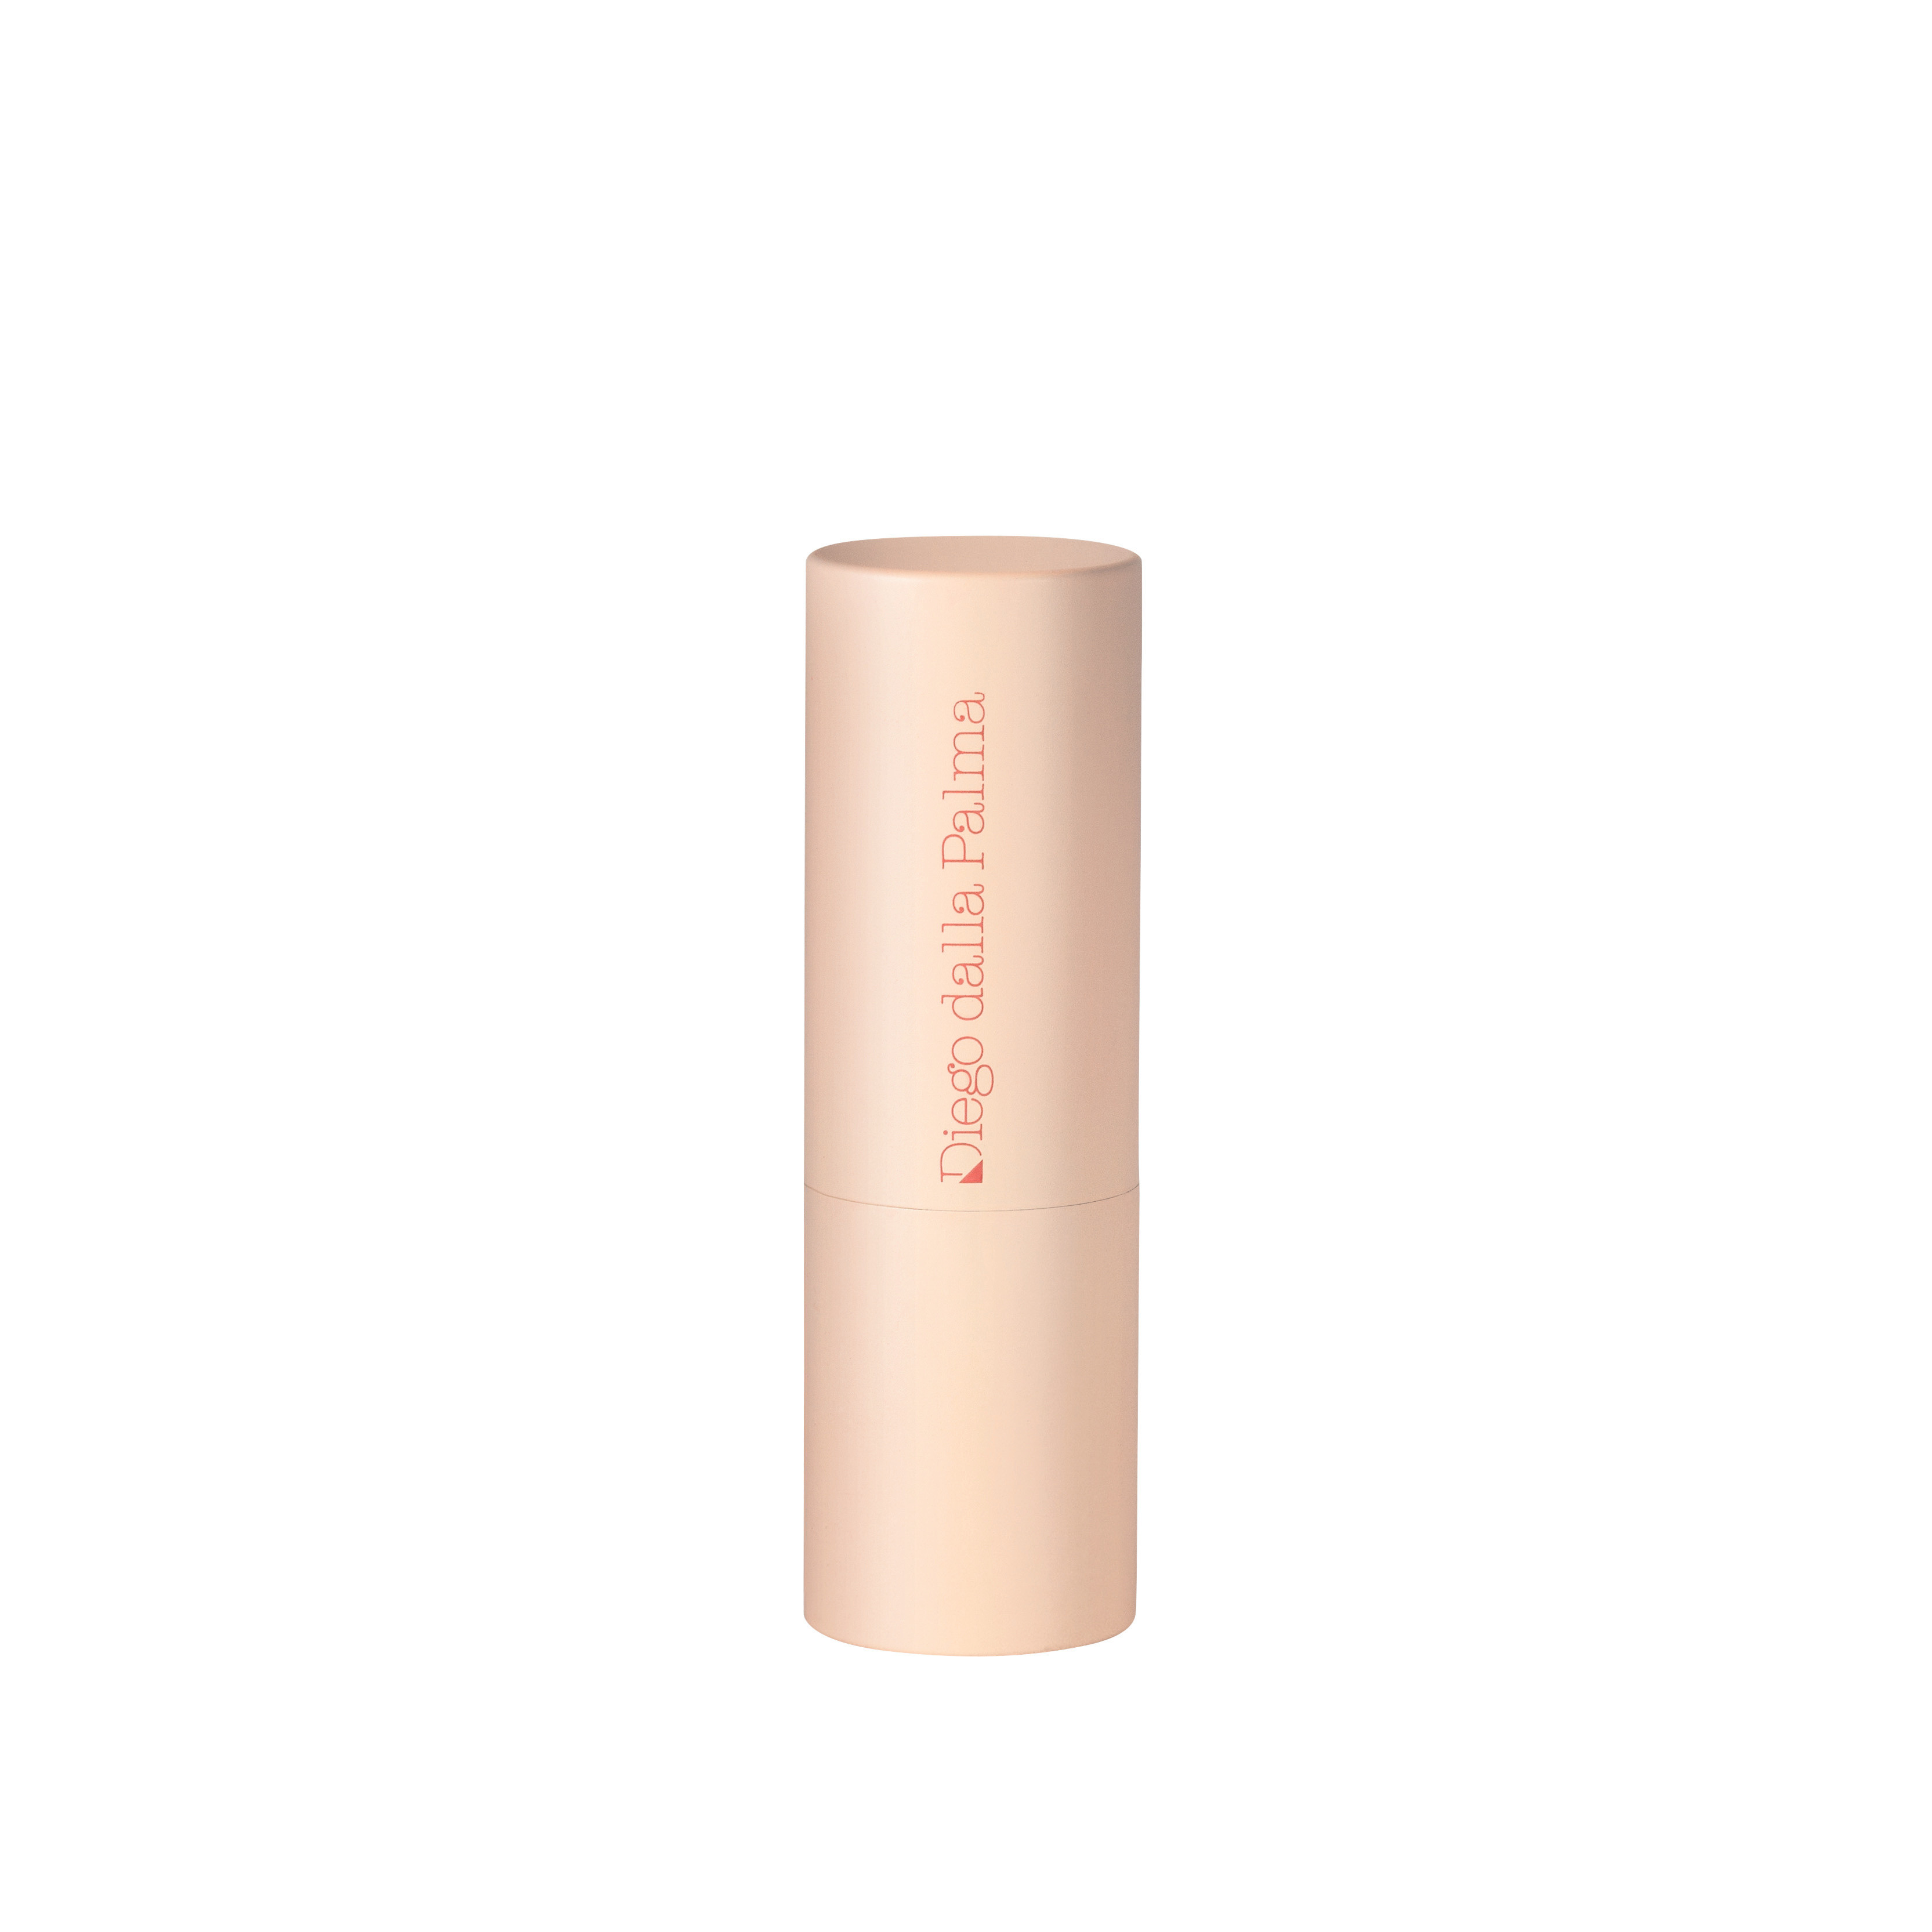 Protect My Lips Protective Lip Balm Spf50+, Nude, large image number 1